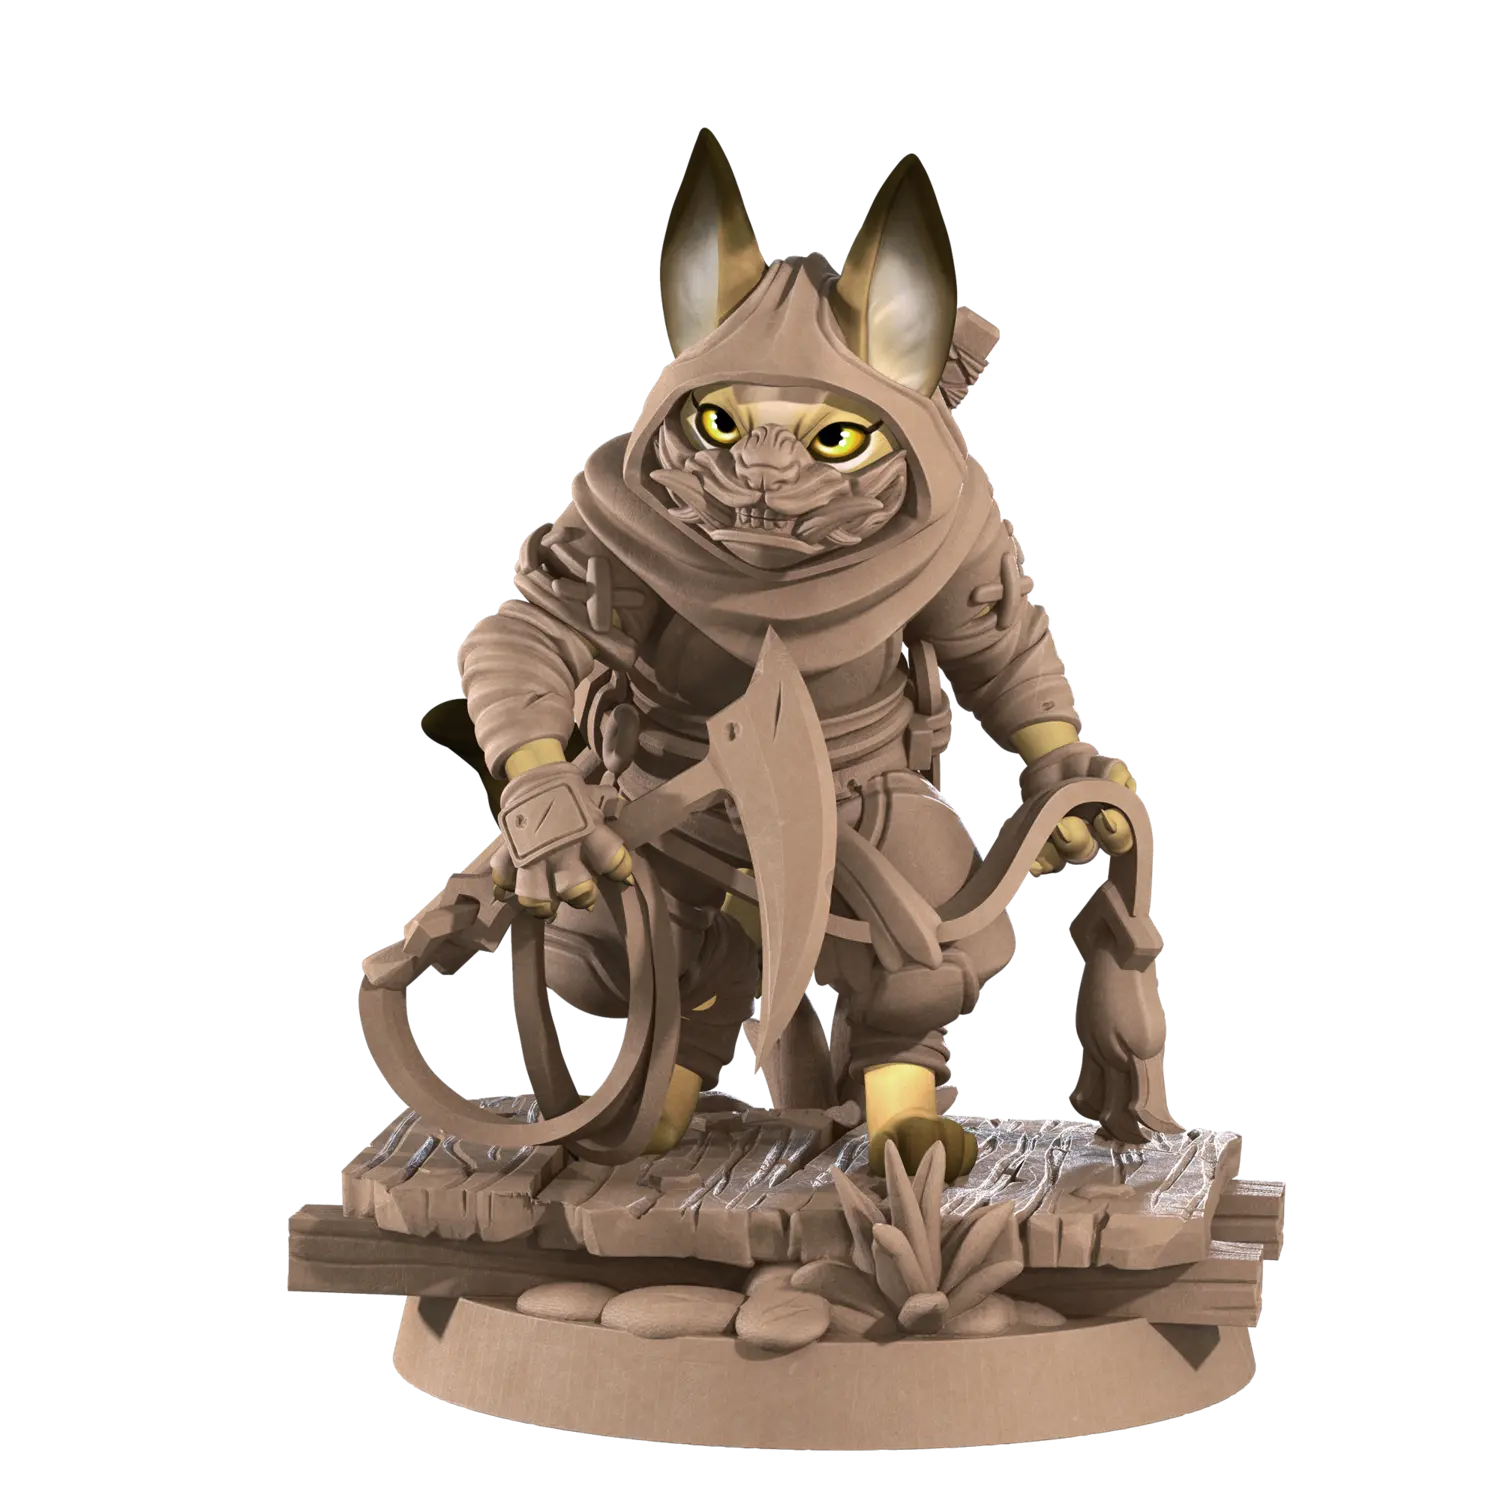 DnD Miniature - Rogue - Tabaxi Alisher 01 Miniature - Rogue - Tabaxi sold by DoubleHitShop